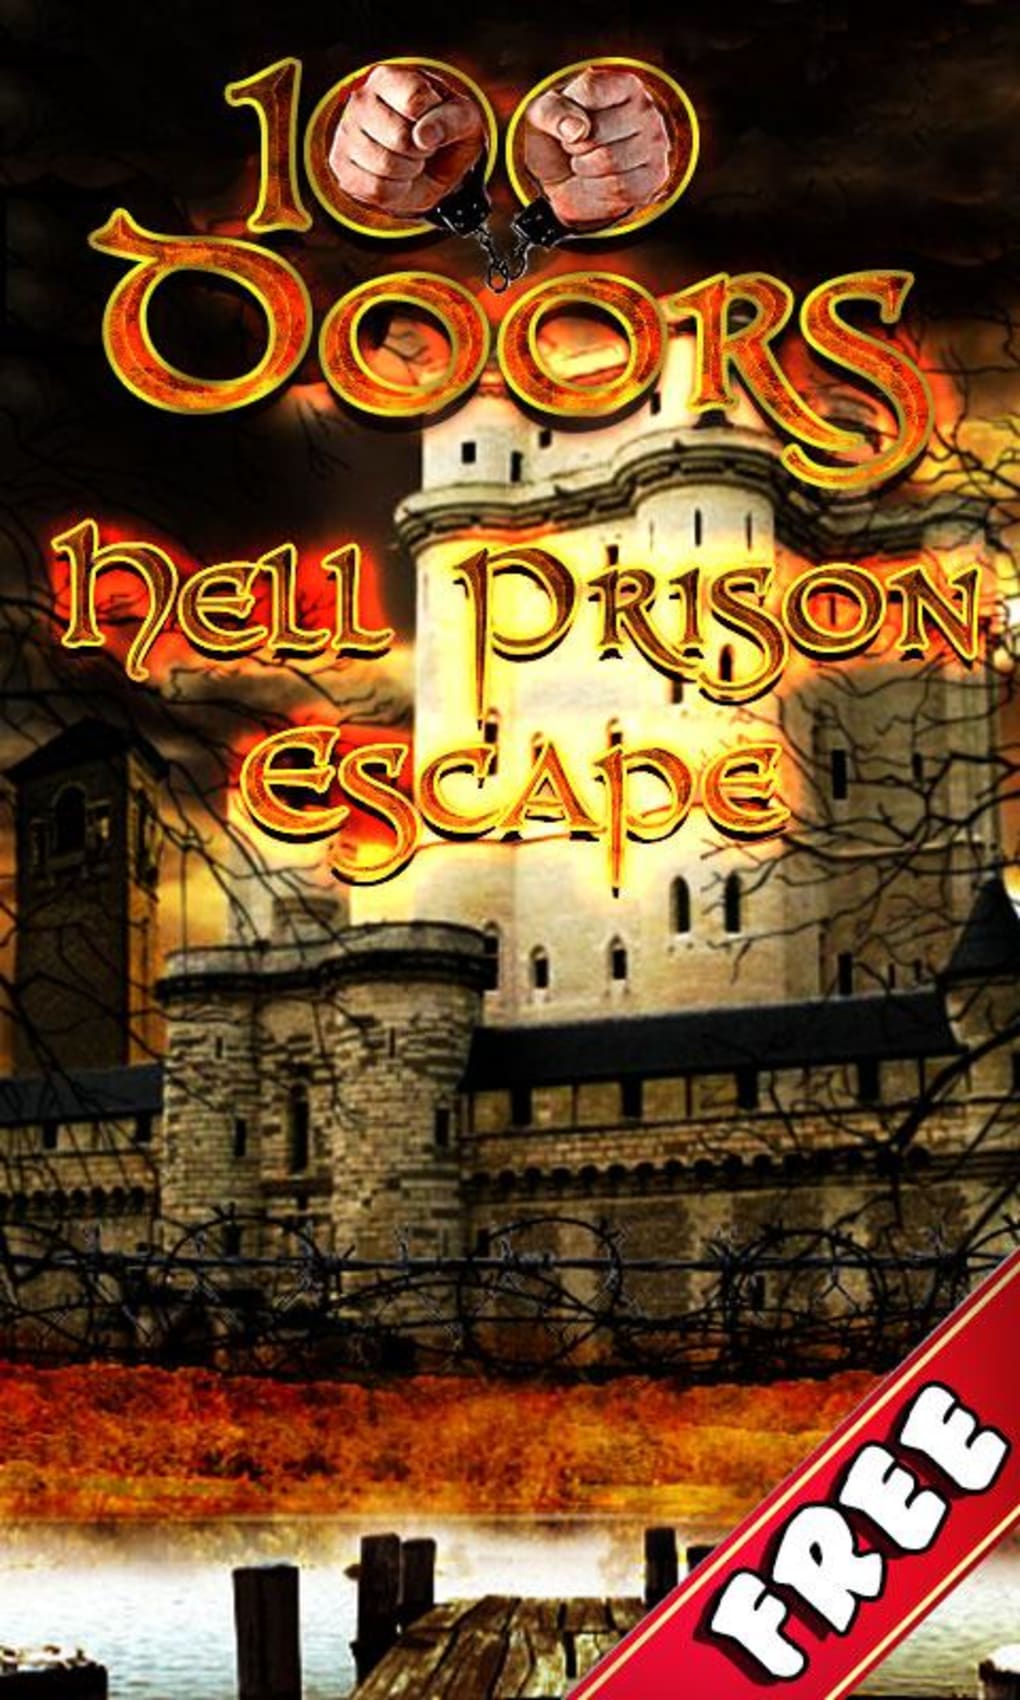 Escape game:prison adventure - Apps on Google Play